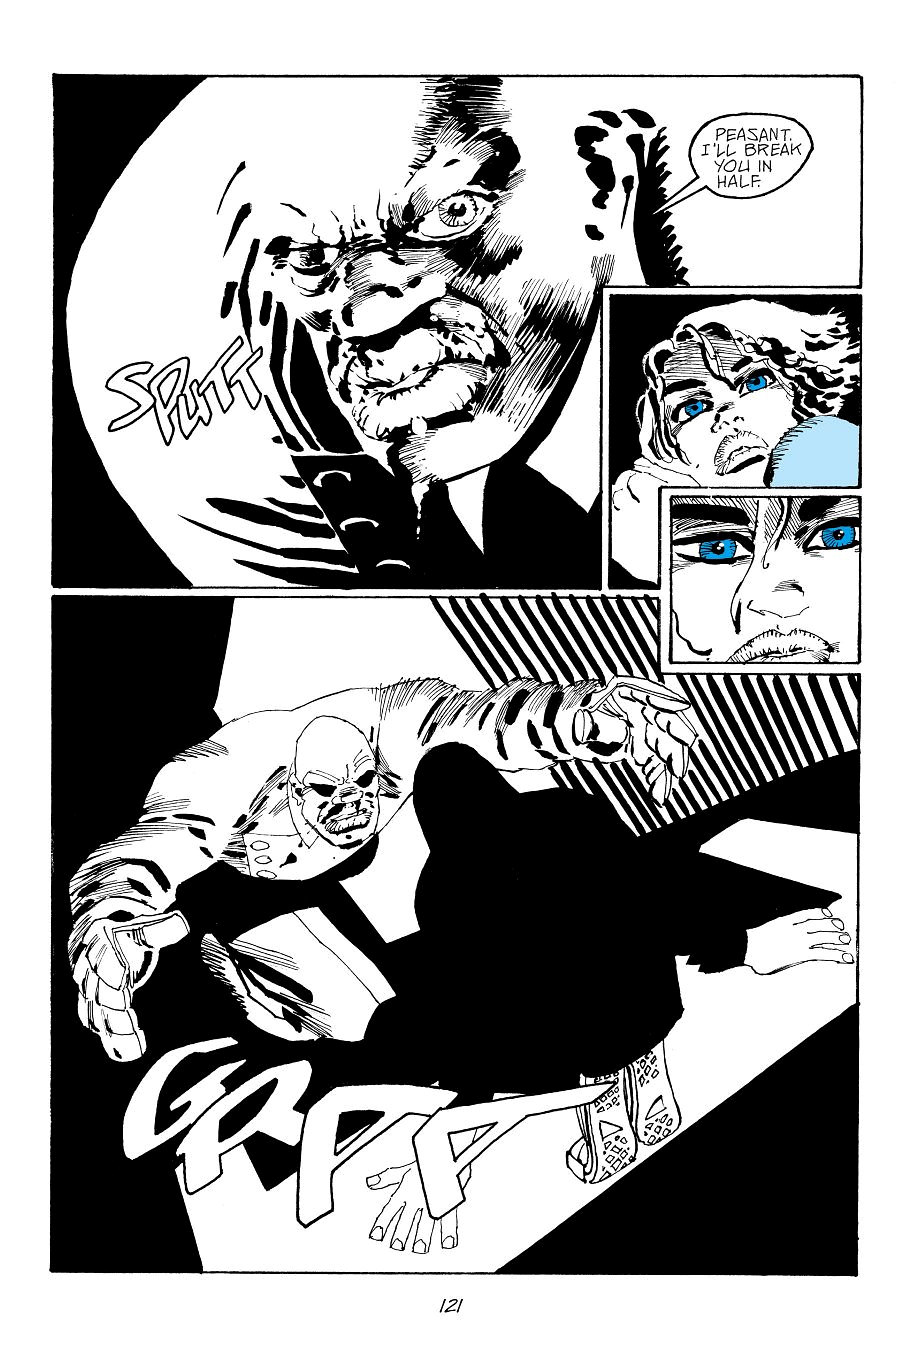 page 121 of sin city 7 hell and back